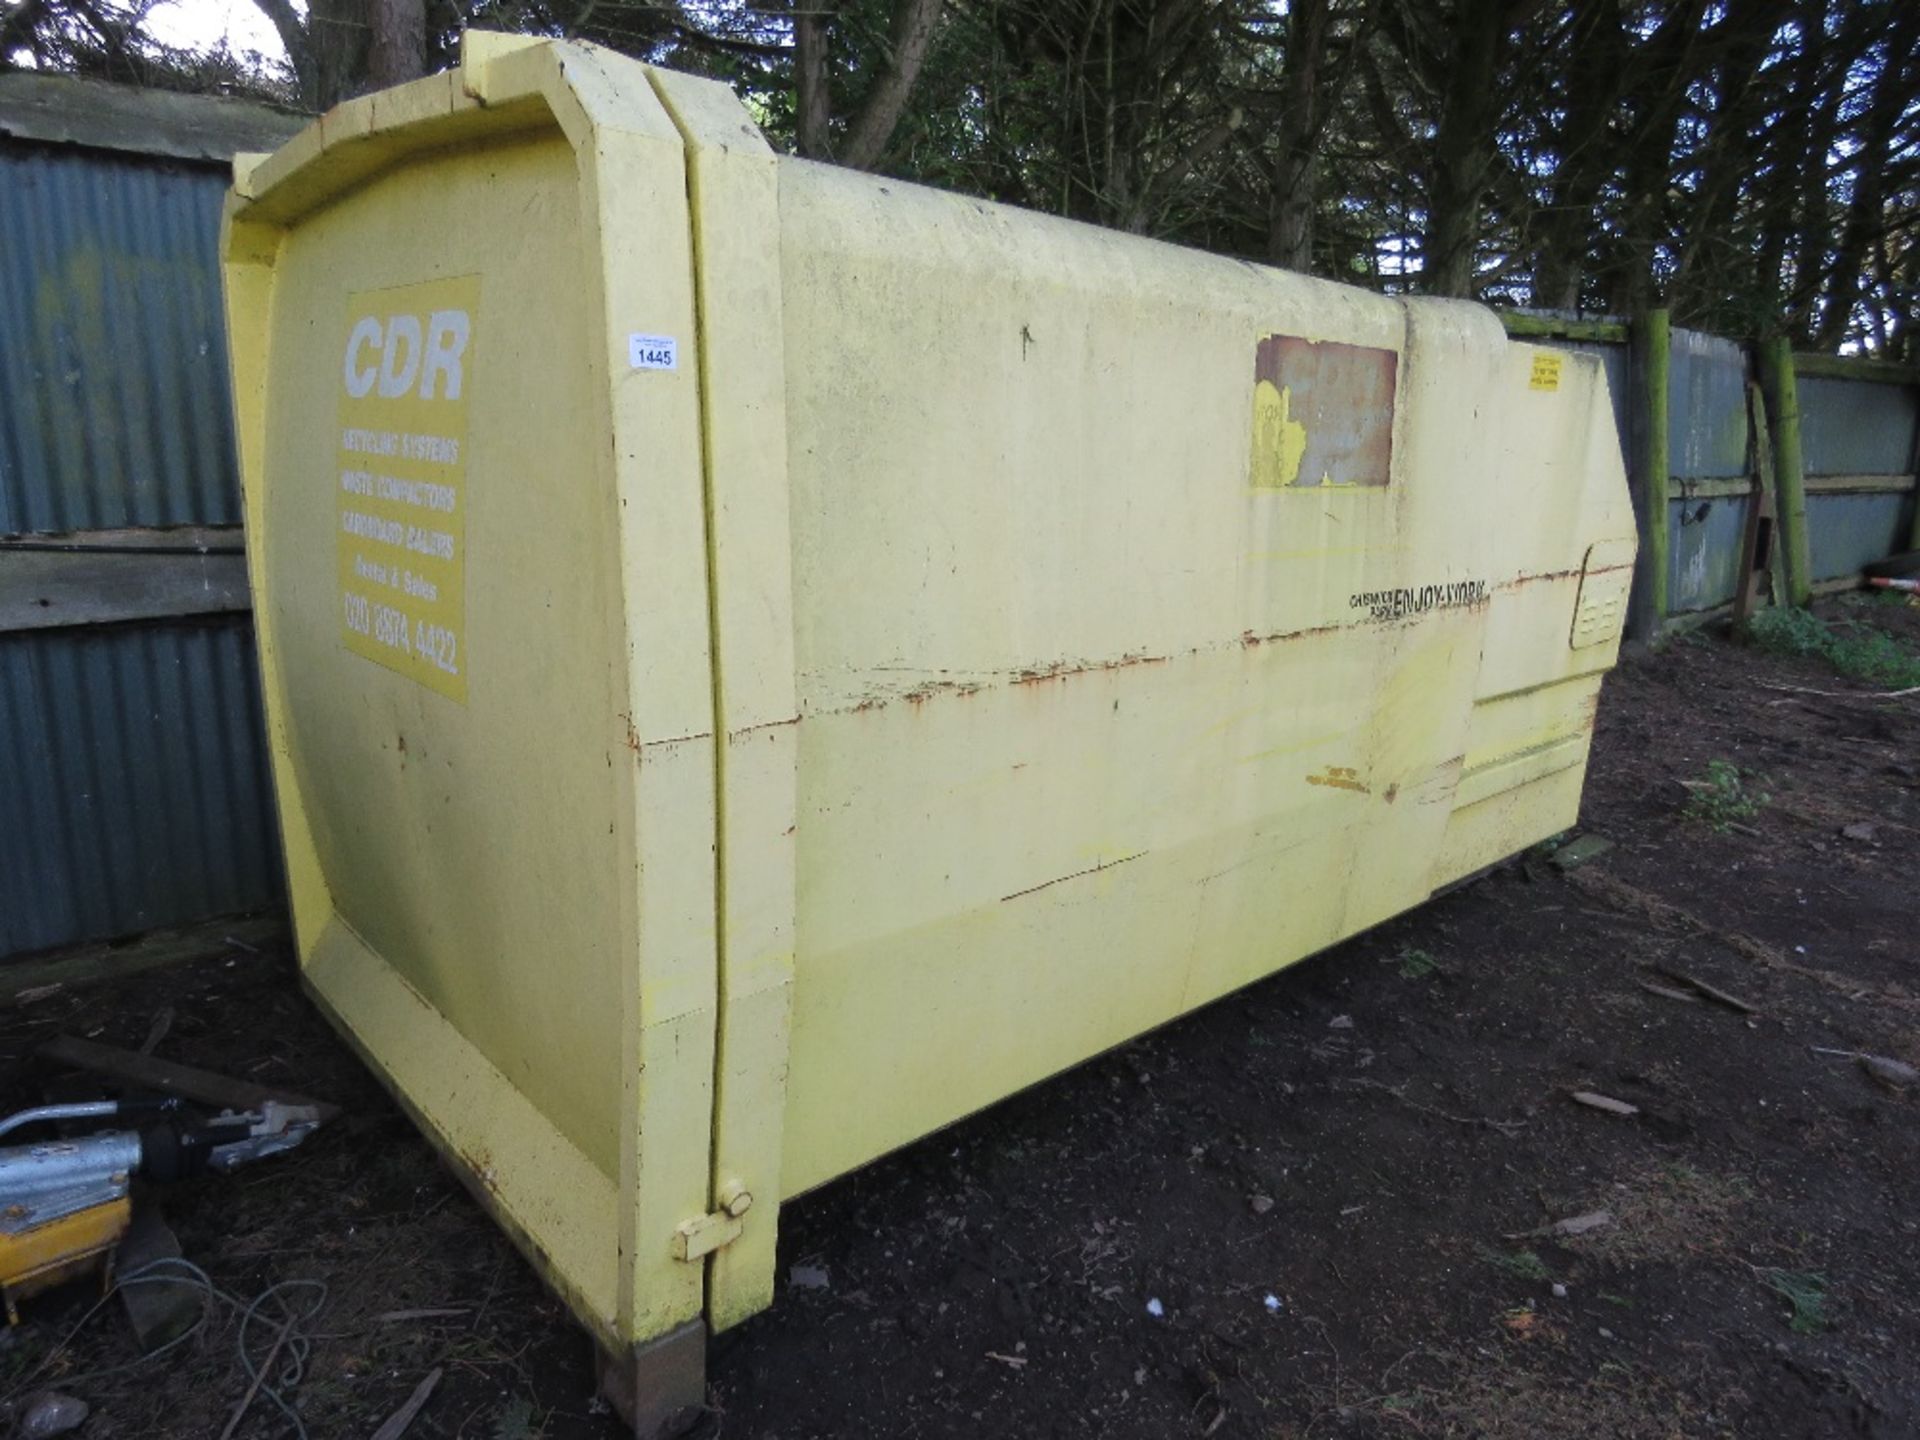 CHISWICK PARK ENJOY-WORK HL5 MOUNTED ELECTRIC POWERED COMPACTOR BIN. 12FT OVERALL LENGTH APPROX. DIR